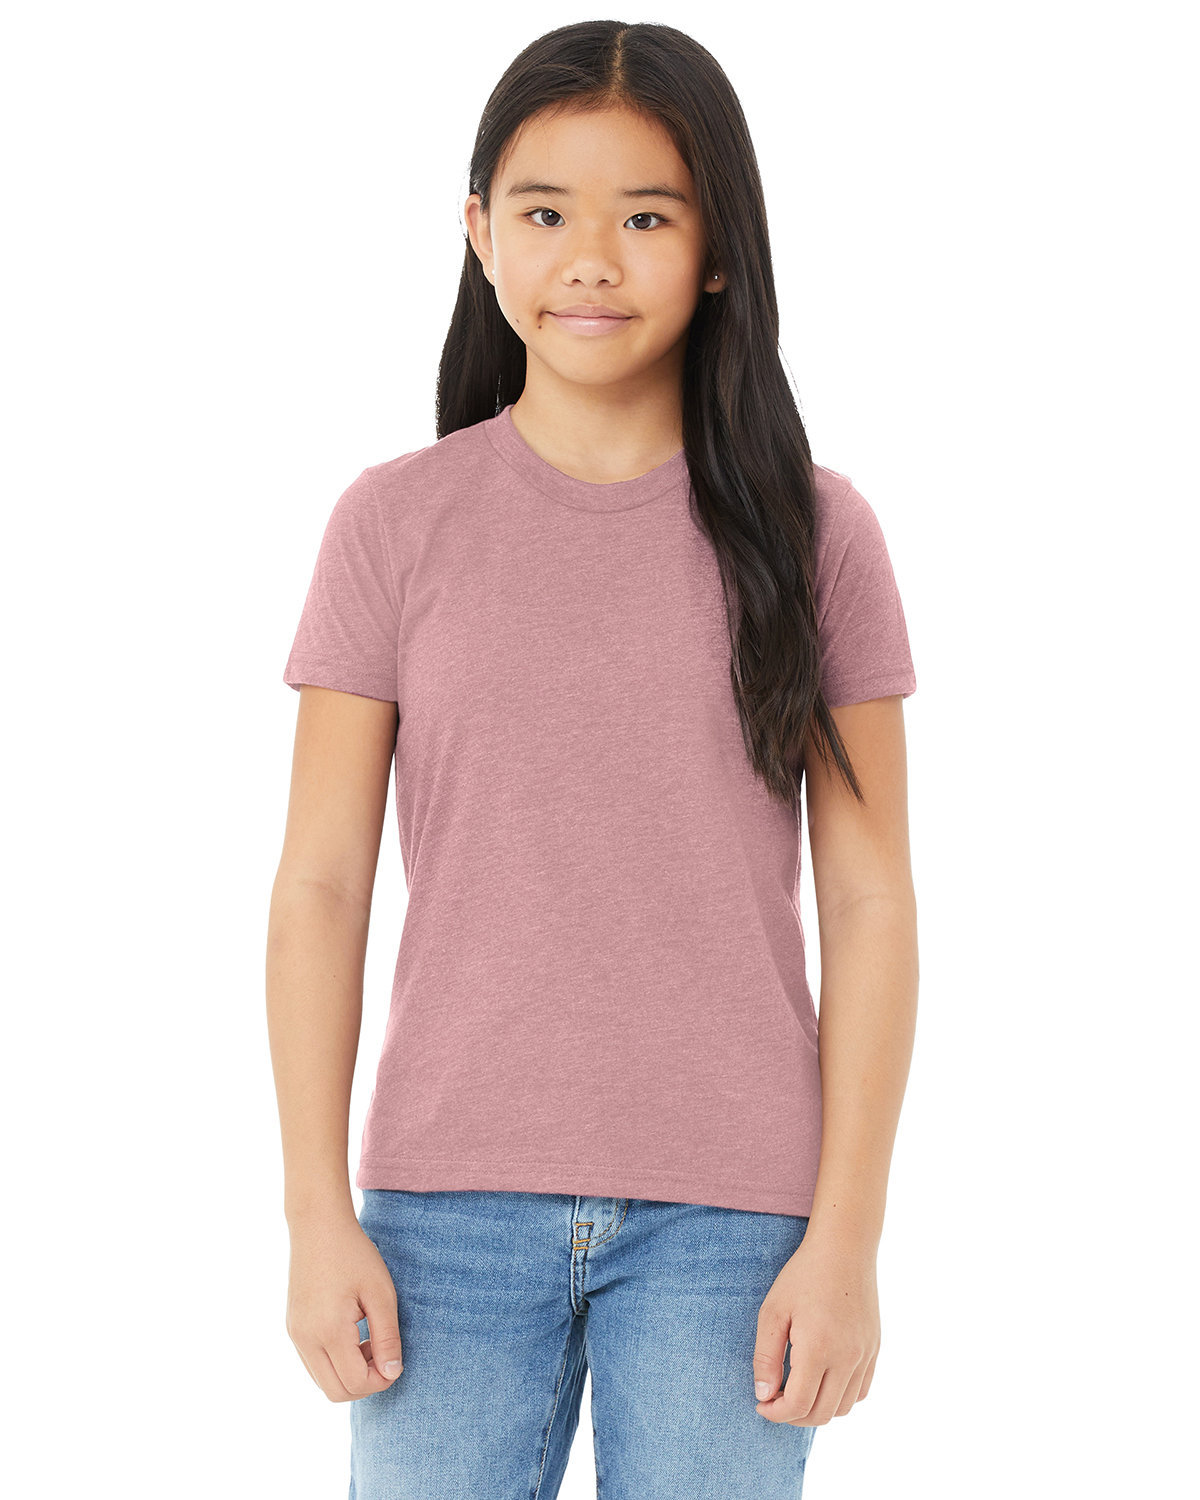 Bella + Canvas Youth CVC Jersey T-Shirt HEATHER ORCHID 